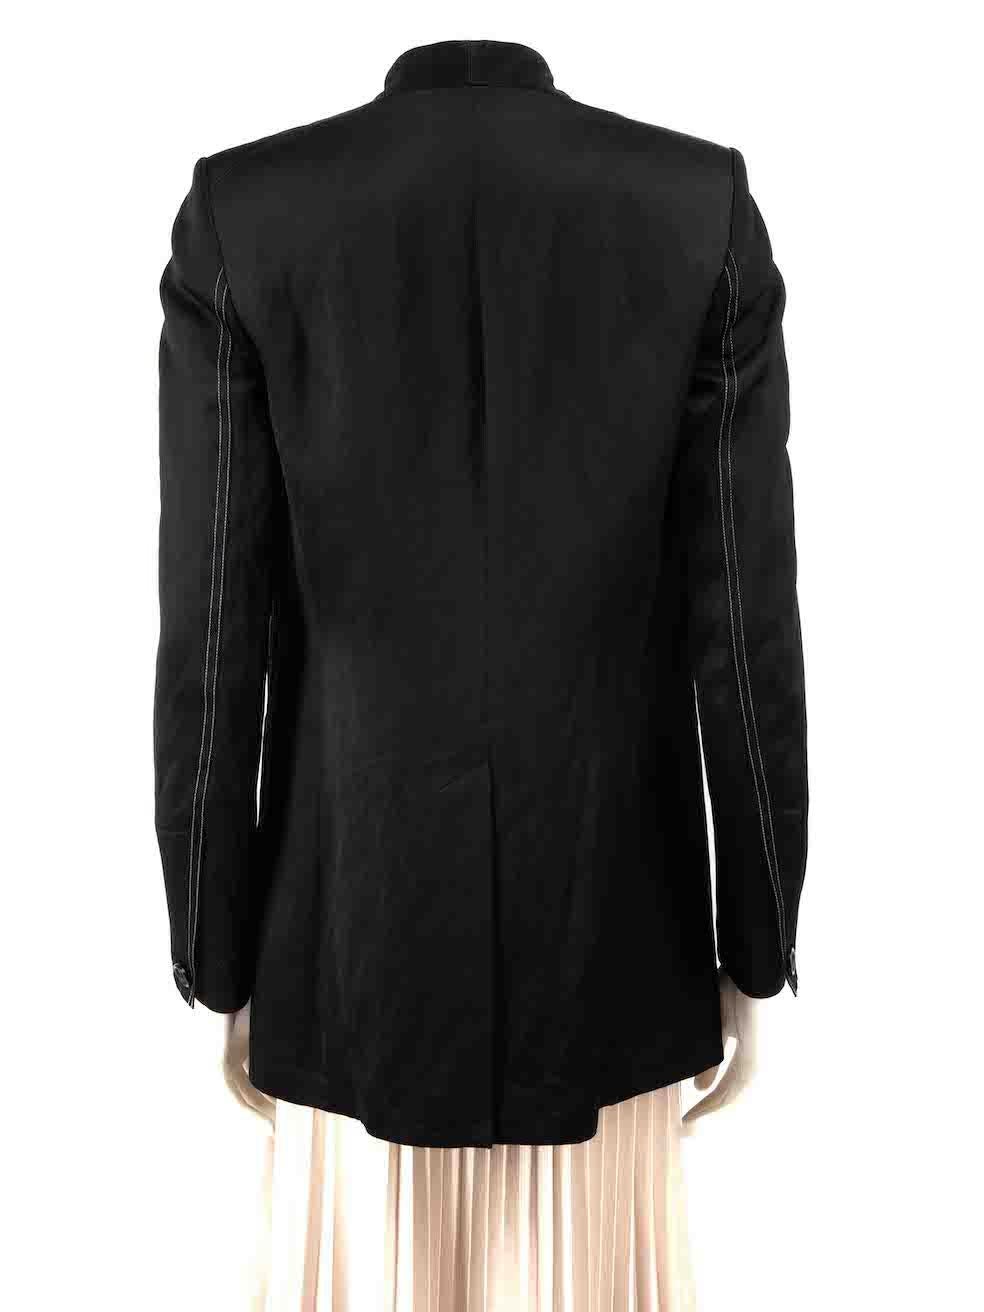 Helmut Lang Black Contrast Collarless Blazer Size XXS In Good Condition For Sale In London, GB